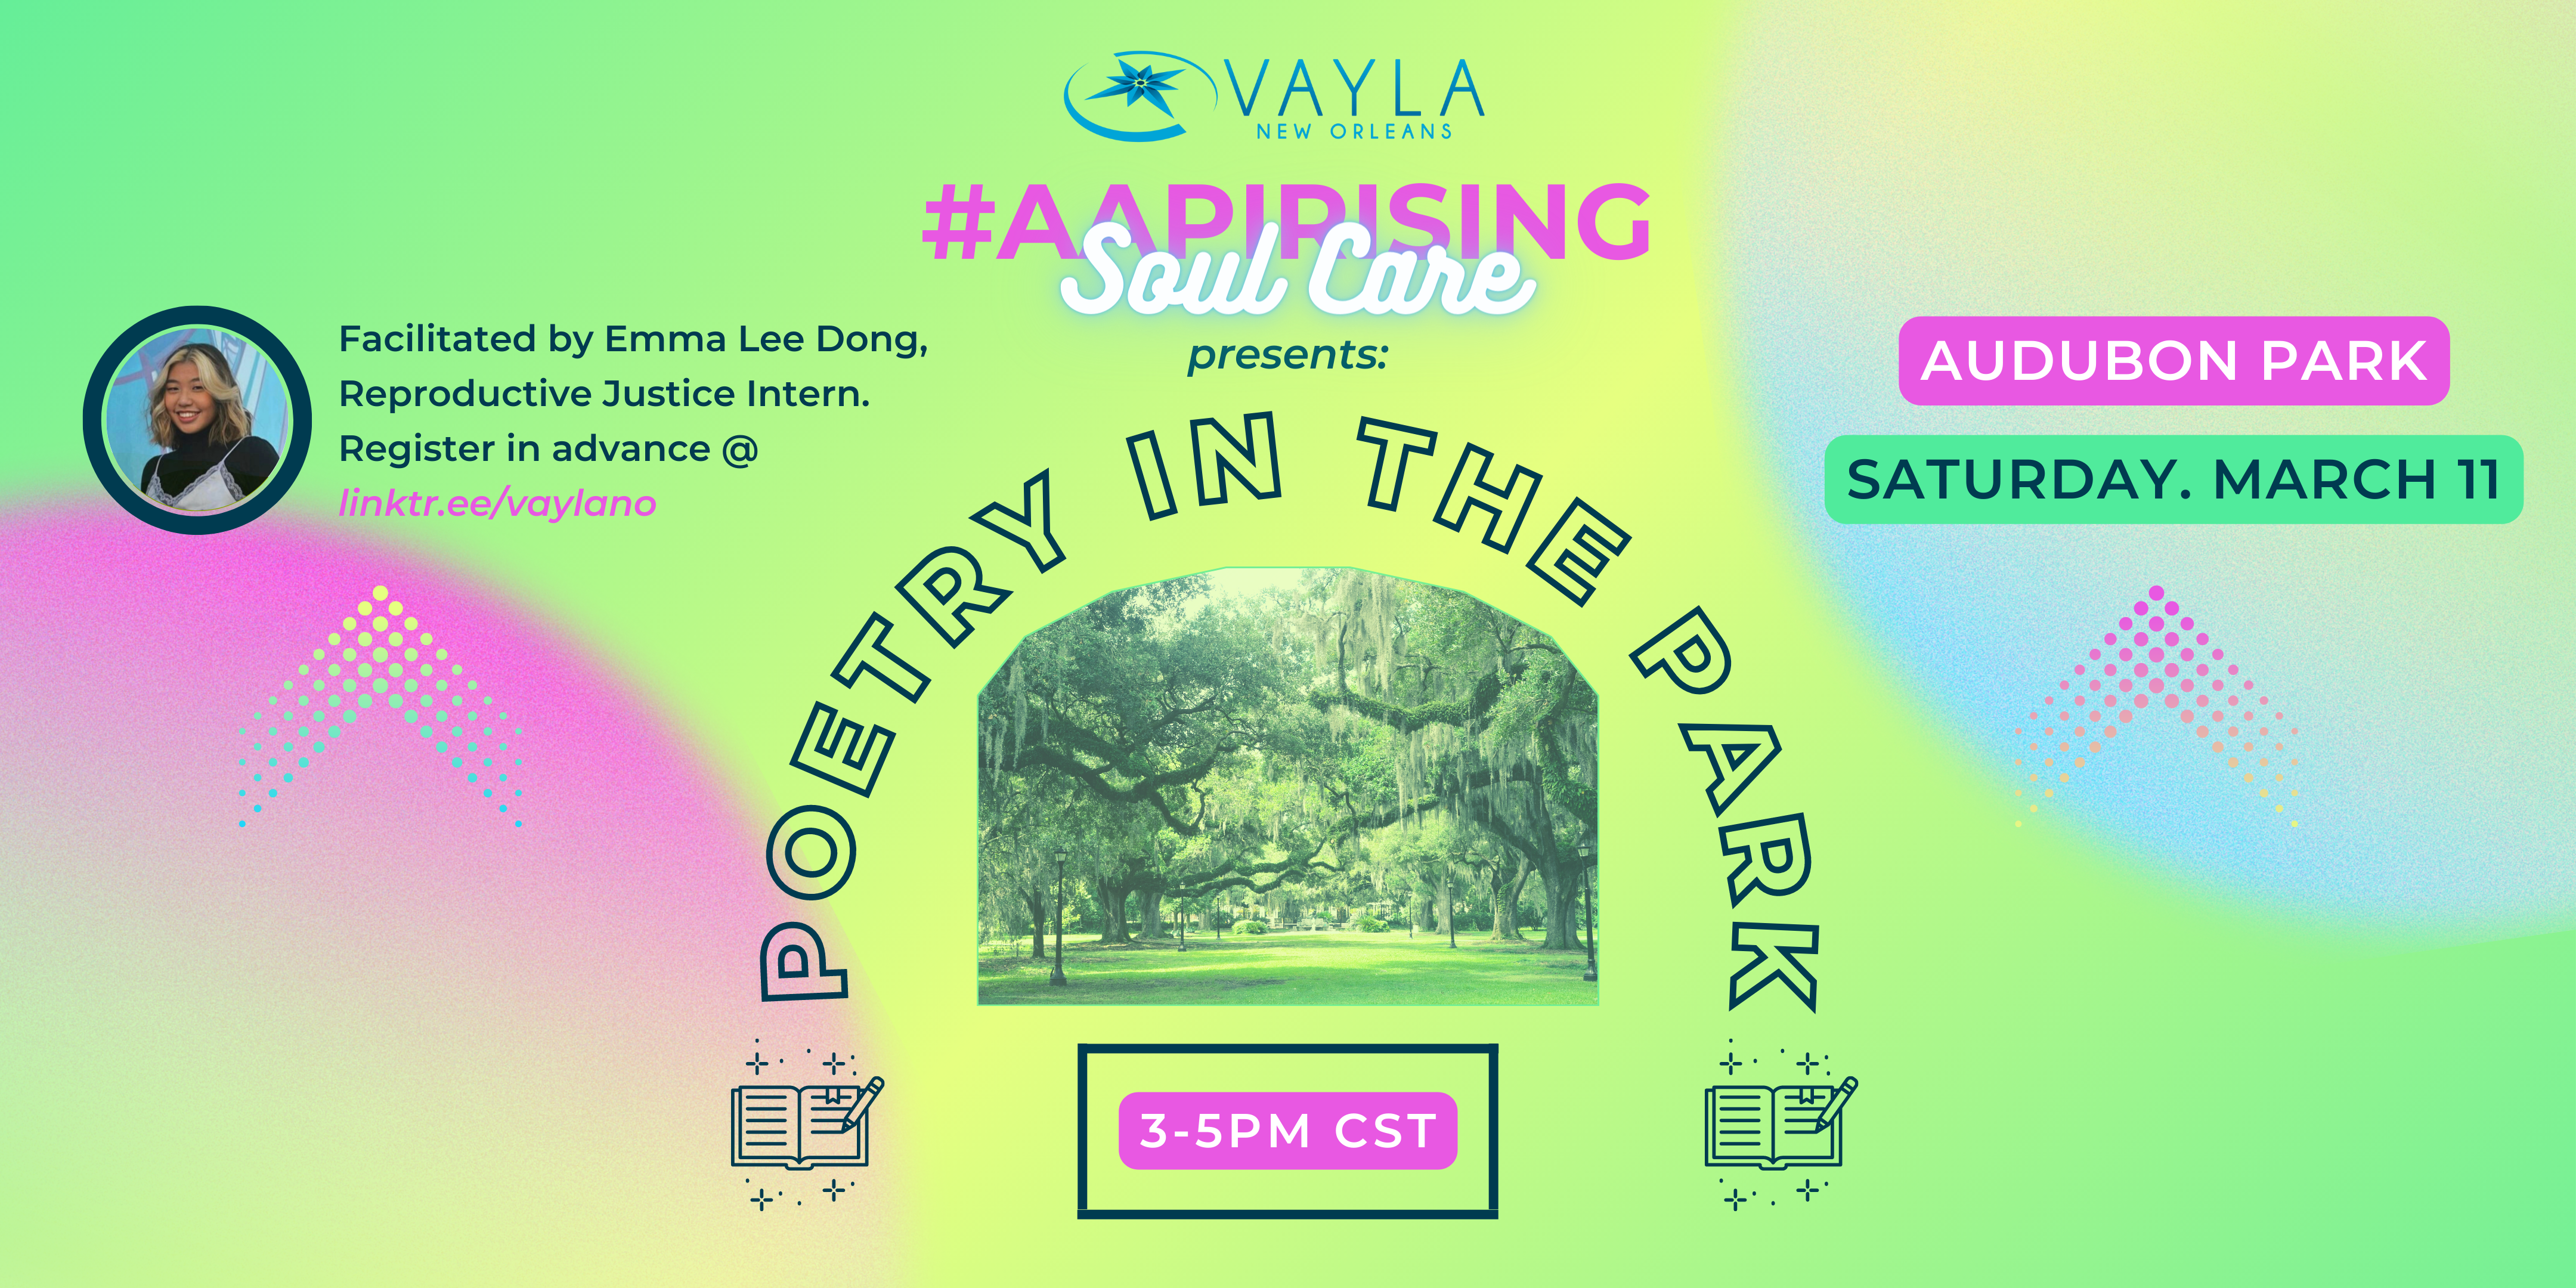 #AAPIRISING Soul Care presents: Poetry in the Park 3-5PM CST Saturday, March 11 Audubon Park Facilitated by Emma Lee Dong, Reproductive Justice Intern. Register in advance @ linktr.ee/vaylano